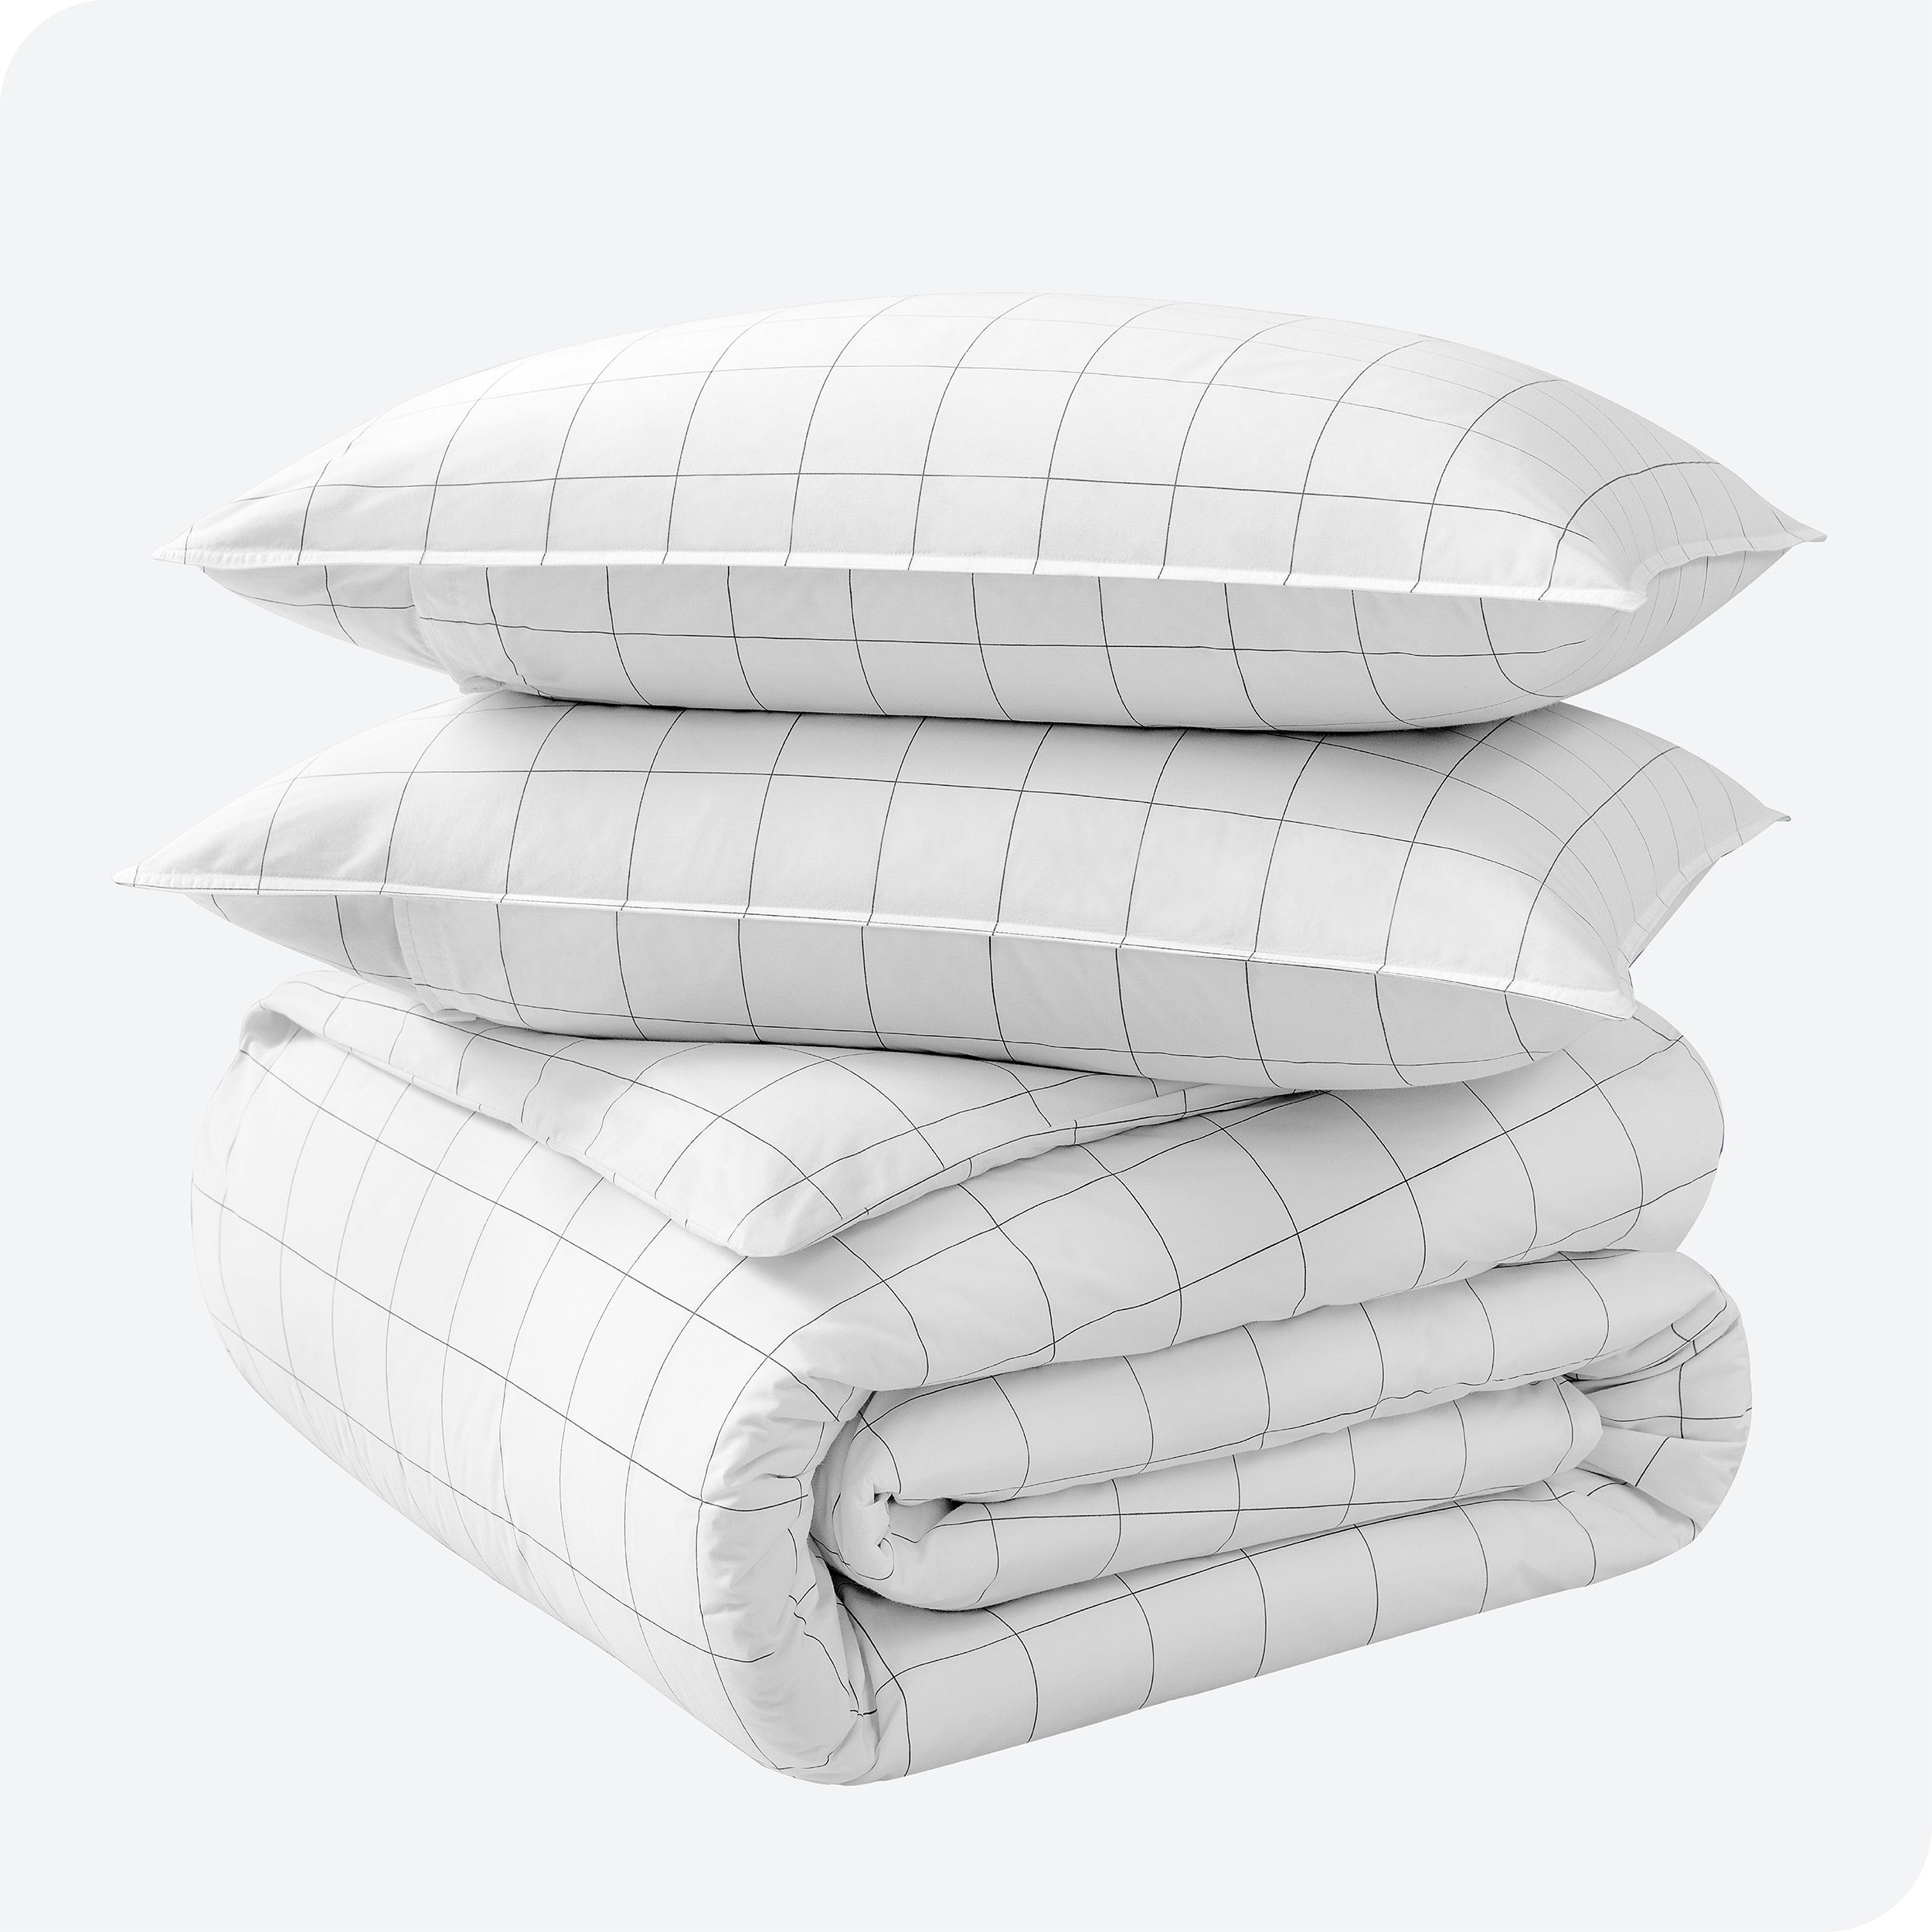 Percale duvet cover set folded and stacked